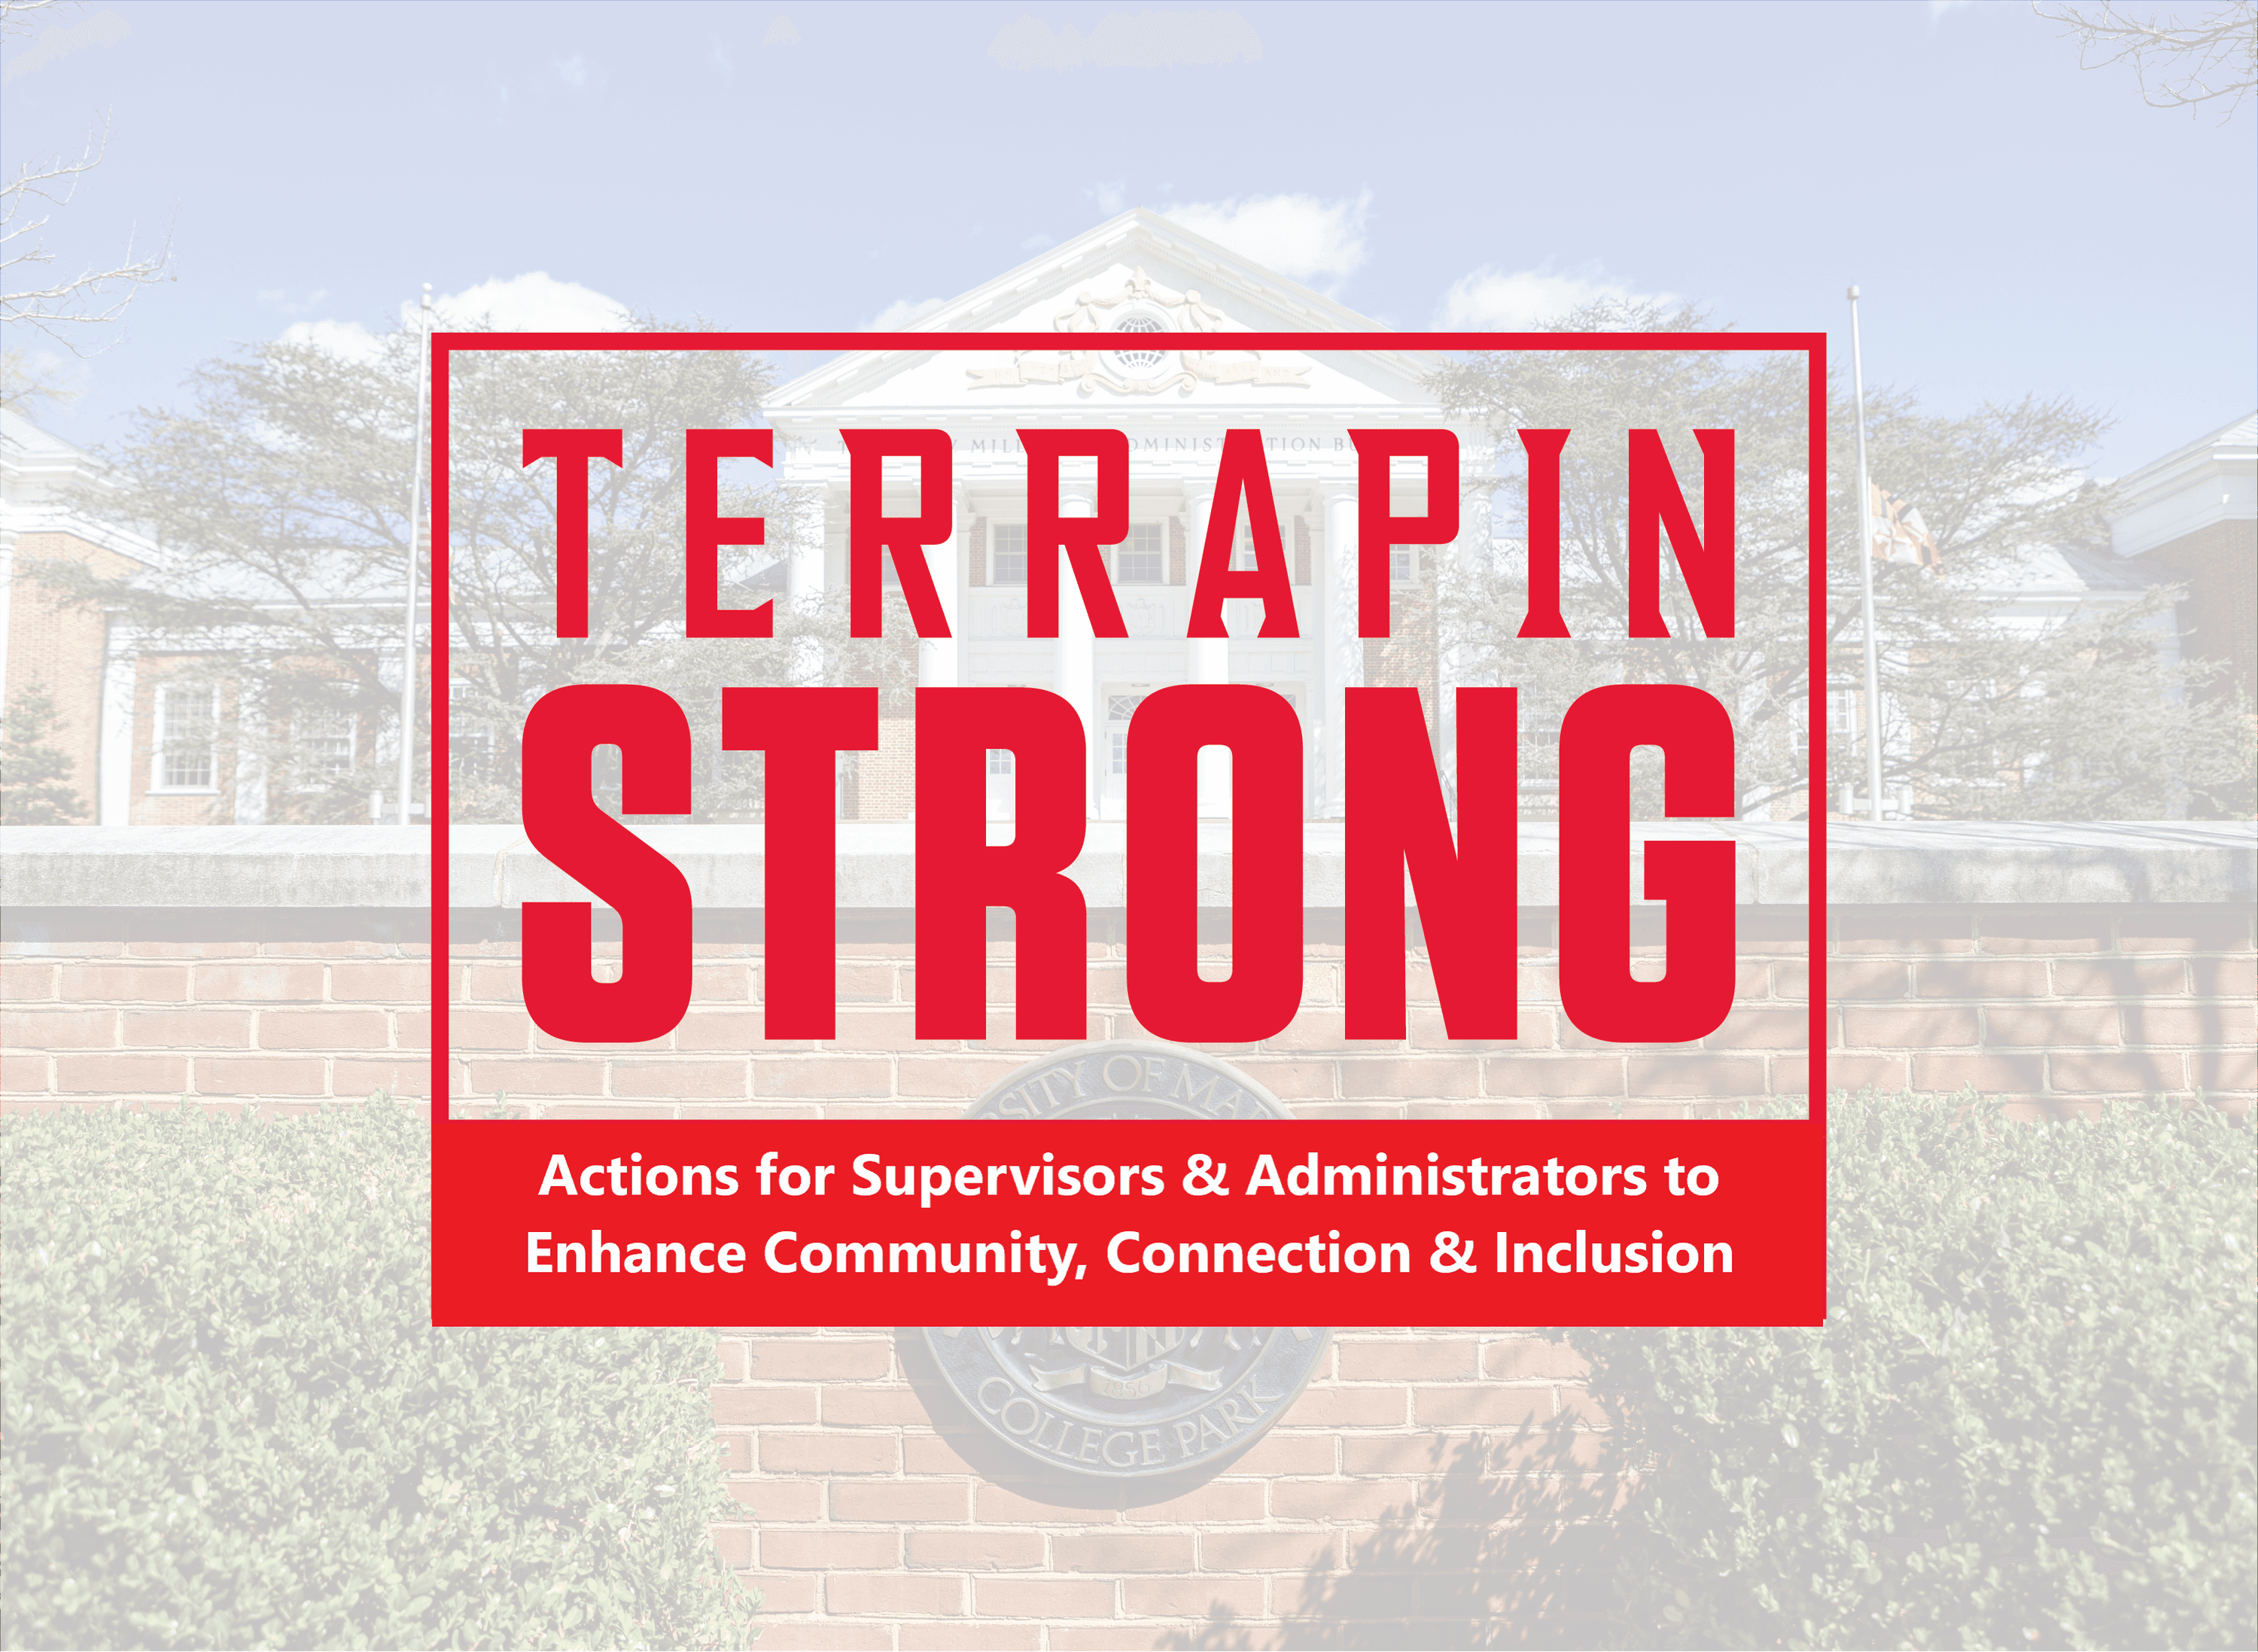 TerrapinSTRONG: Actions for supervisors & administators to enhance community, connection & inclusion